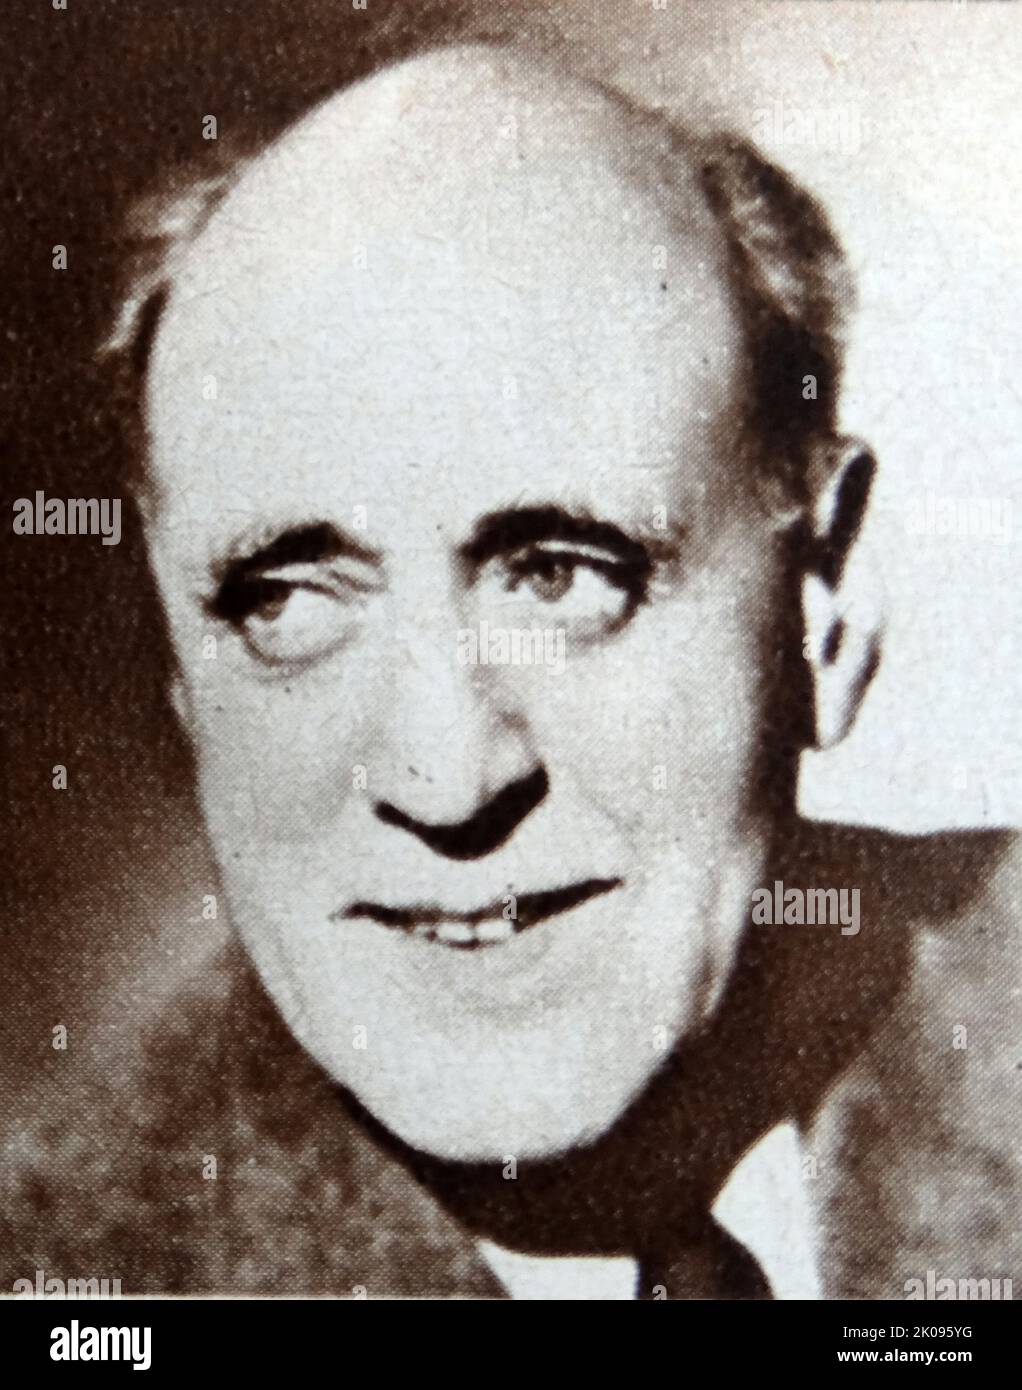 Alastair Sim. Alastair George Bell Sim, CBE (9 October 1900 - 19 August 1976) was a Scottish character actor who began his theatrical career at the age of thirty and quickly became established as a popular West End performer, remaining so until his death in 1976. Stock Photo